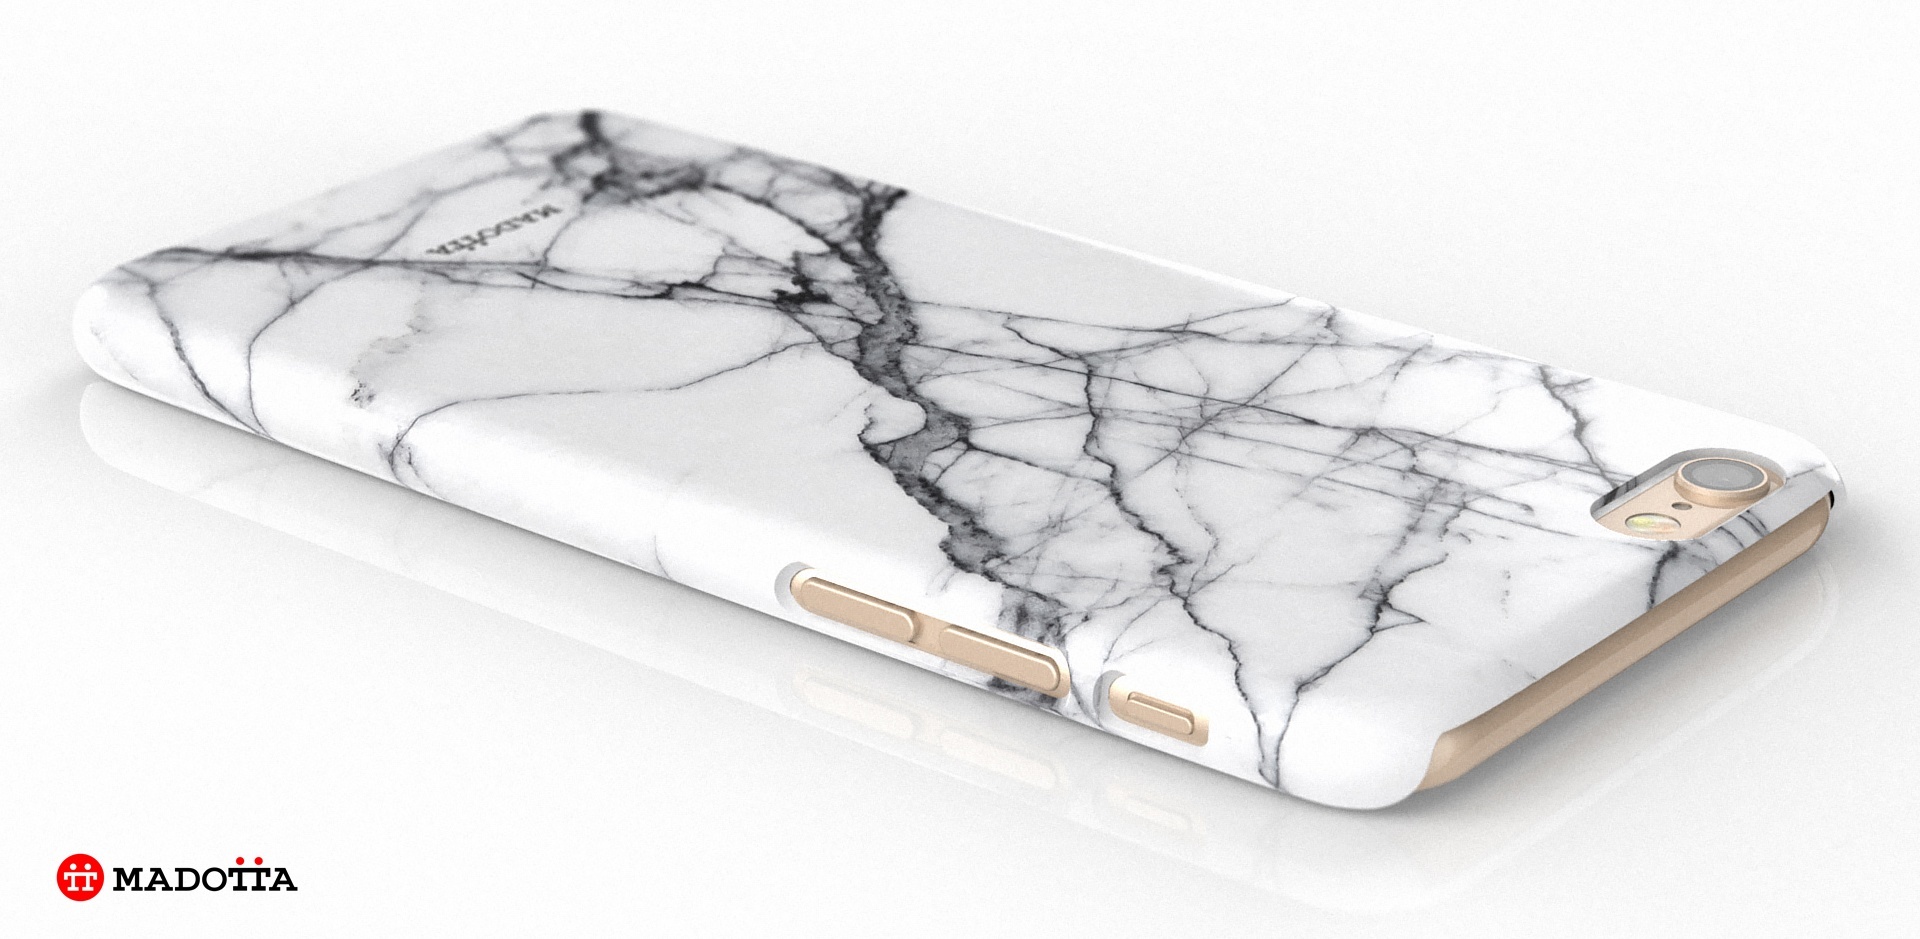 Cracked White Marble iPhone Cover On A Background